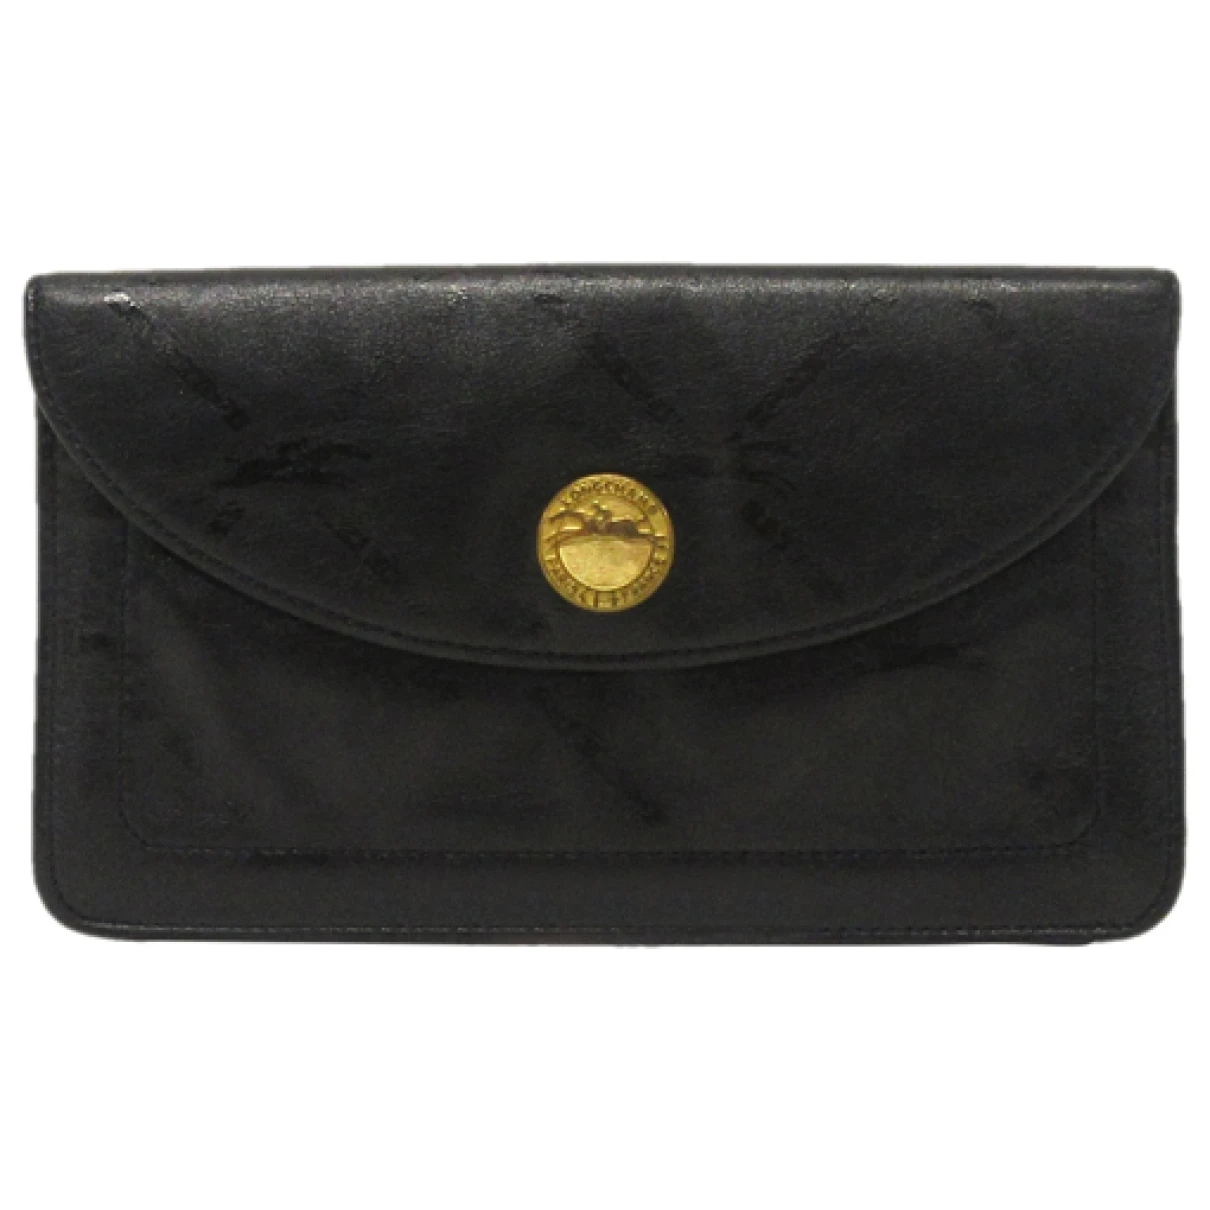 Pre-owned Longchamp Leather Clutch In Black